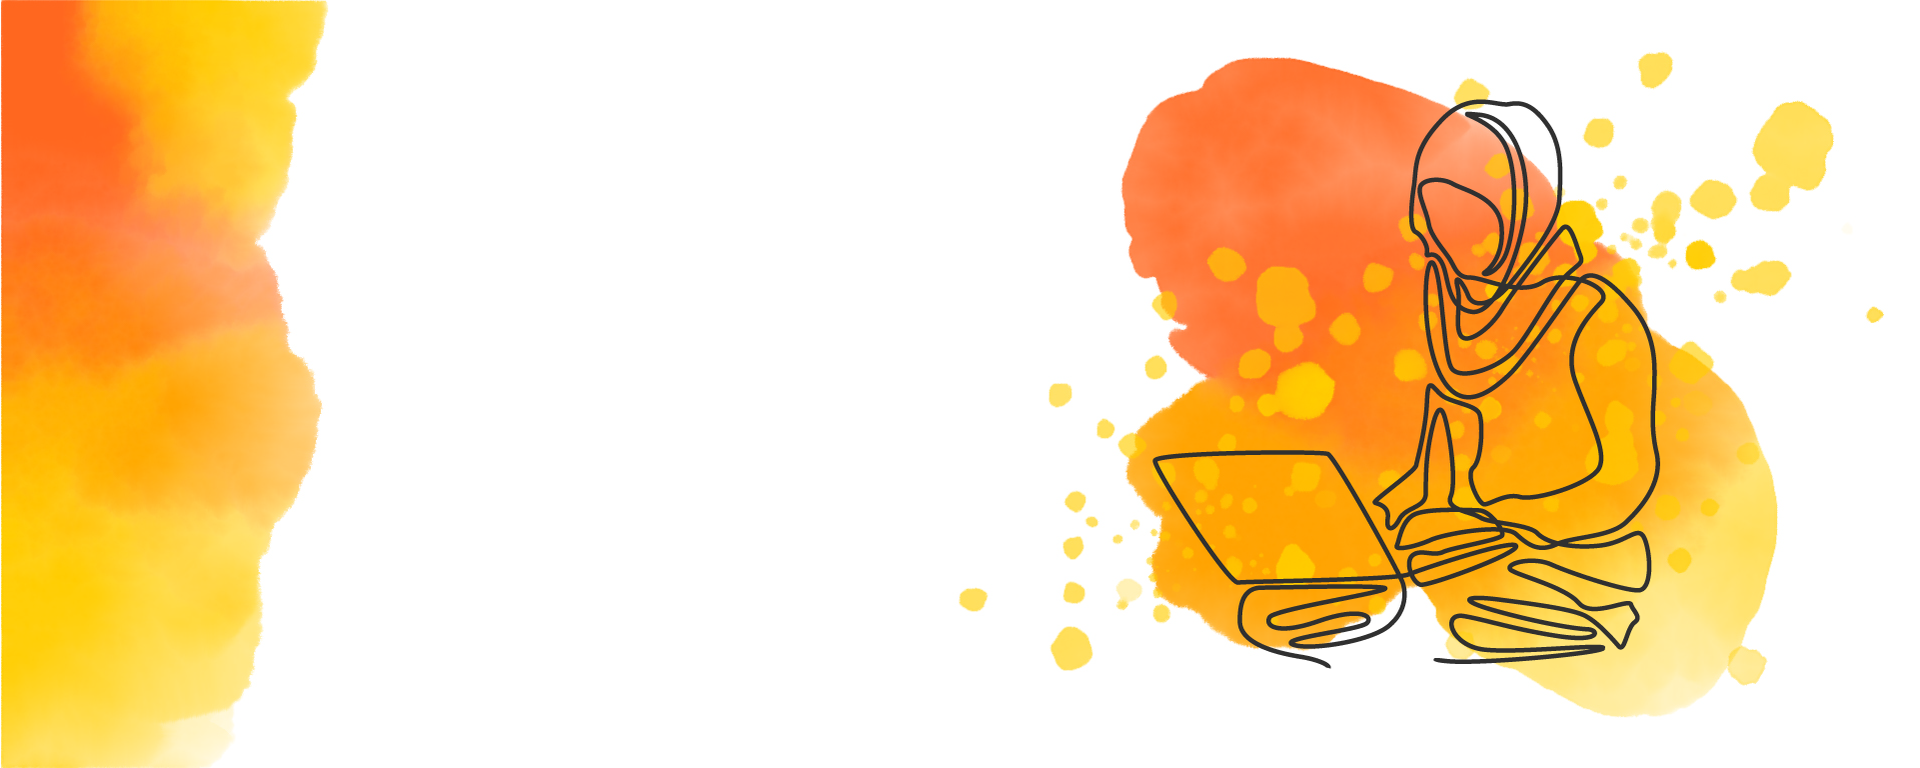 White background with orange and yellow watercolour marks and the outline of a student working on a laptop.